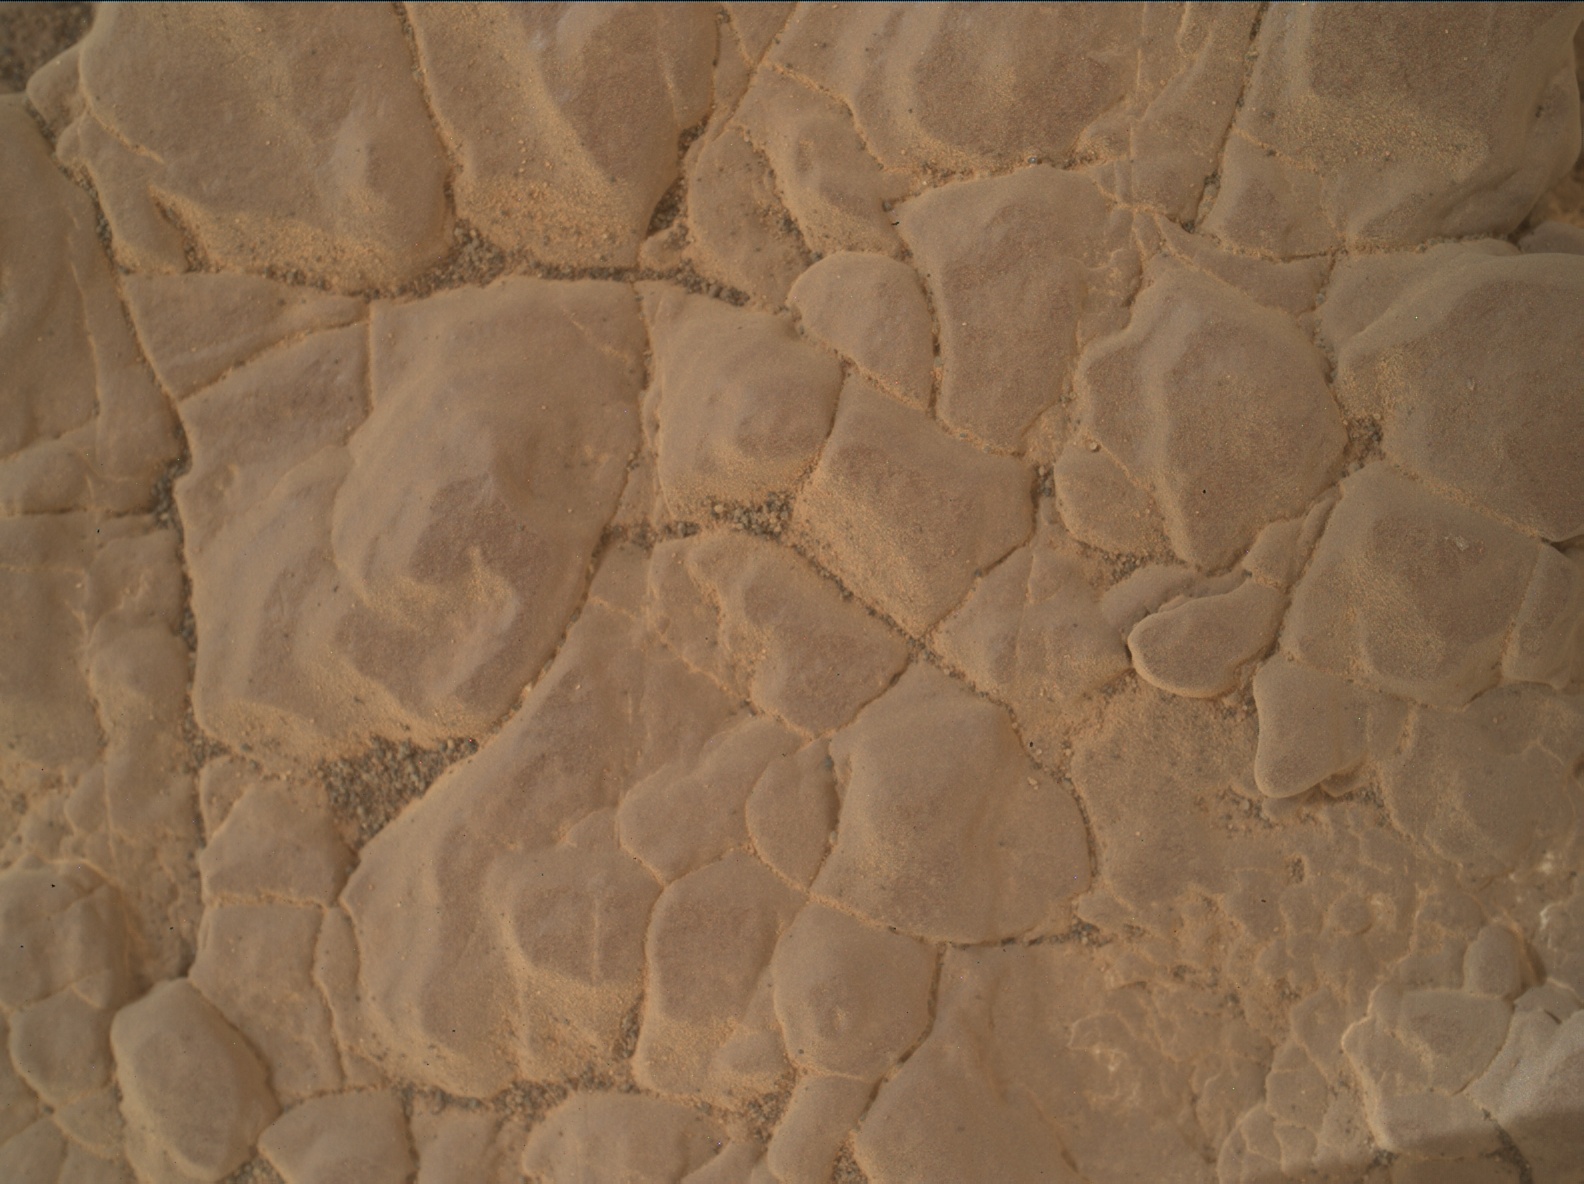 Nasa's Mars rover Curiosity acquired this image using its Mars Hand Lens Imager (MAHLI) on Sol 3010